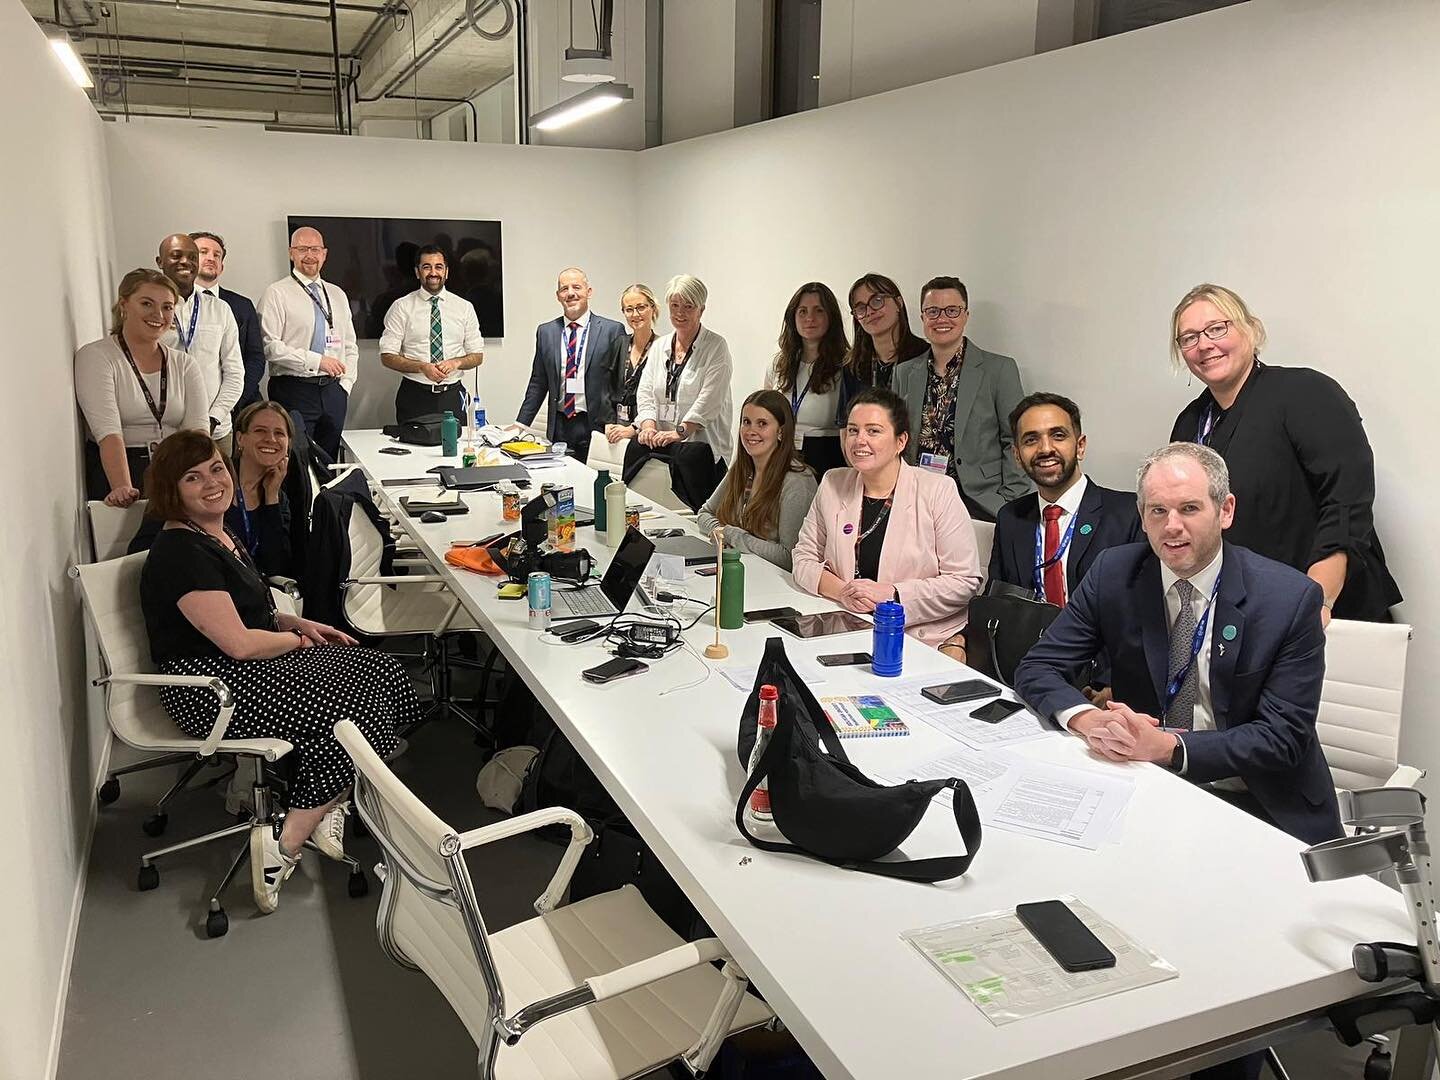 The wonderful ScotGov COP28 team, made up of a wide range of experts in varying departments from policy to logistics to security to comms and more. 

I was so impressed by these individuals who worked tirelessly to bring the FM&rsquo;s programme toge